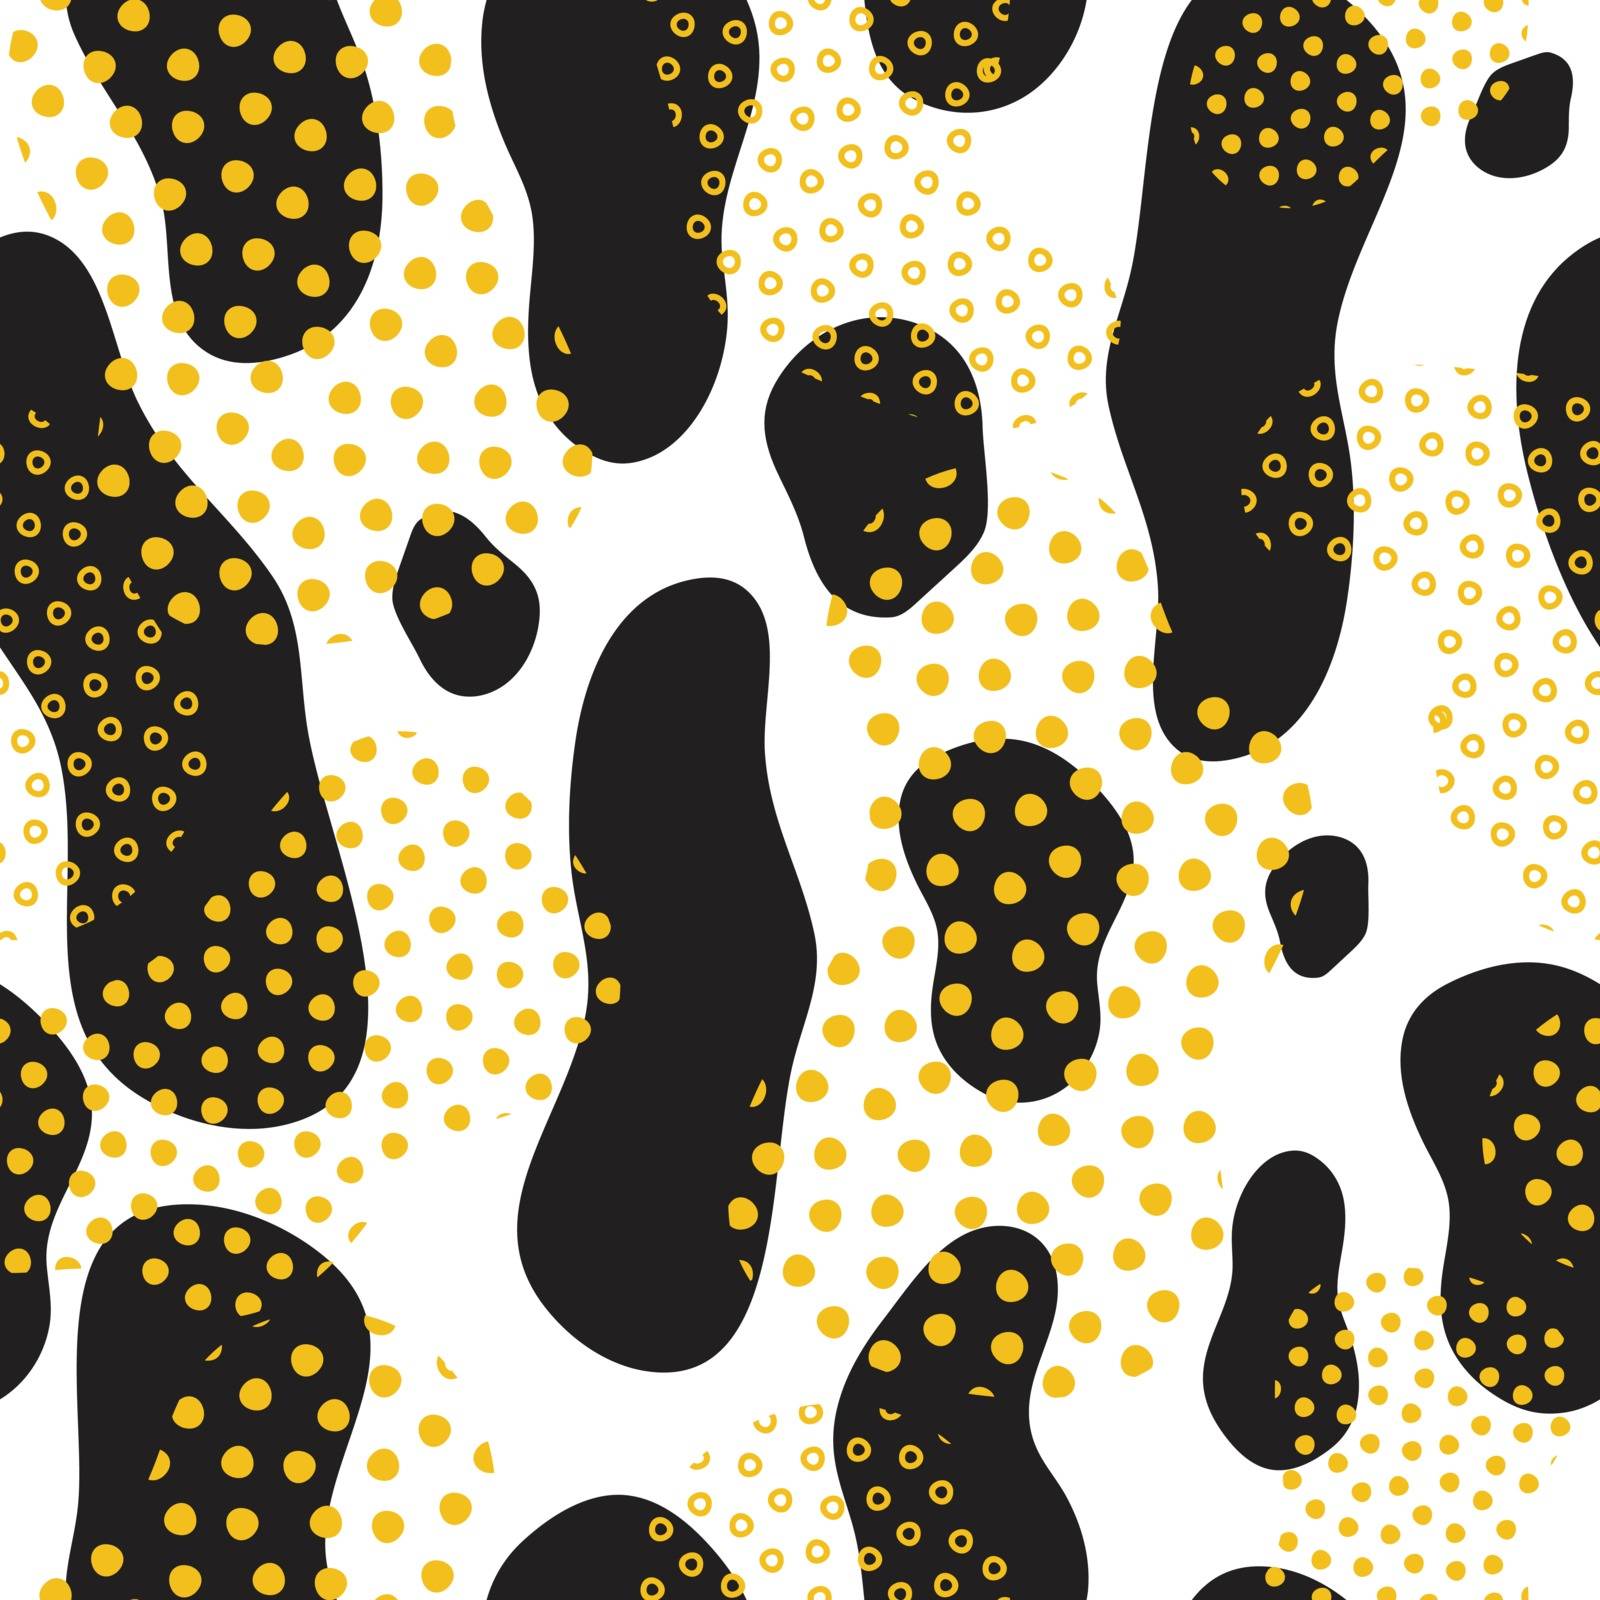 Abstract background geometric fashion ornament vector seamless pattern. Camouflage textile illustration with dots in black, white, yellow